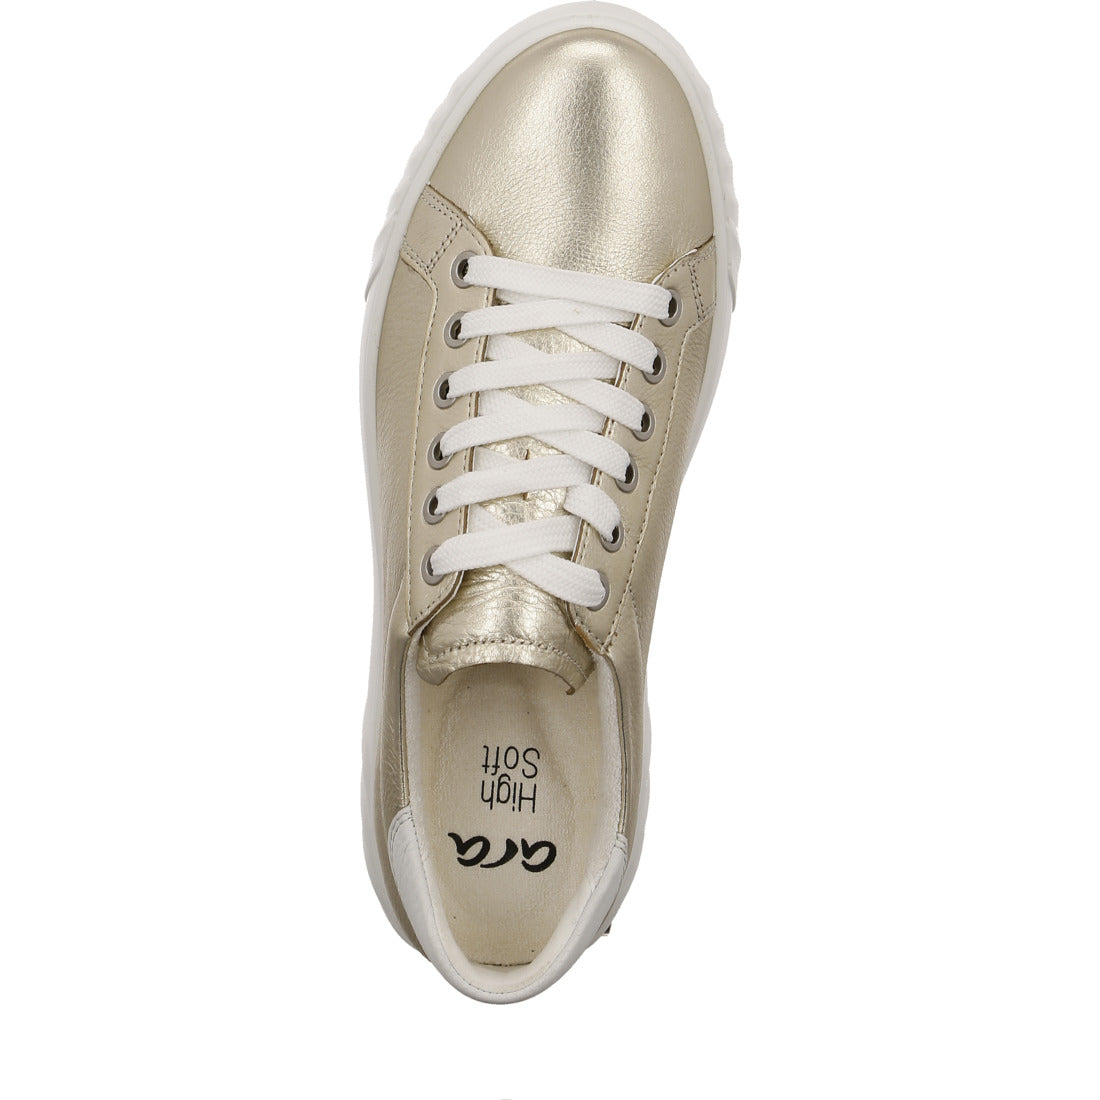 Top view showing the lace fastening and rounded toe of the Ara gold and white sneaker.